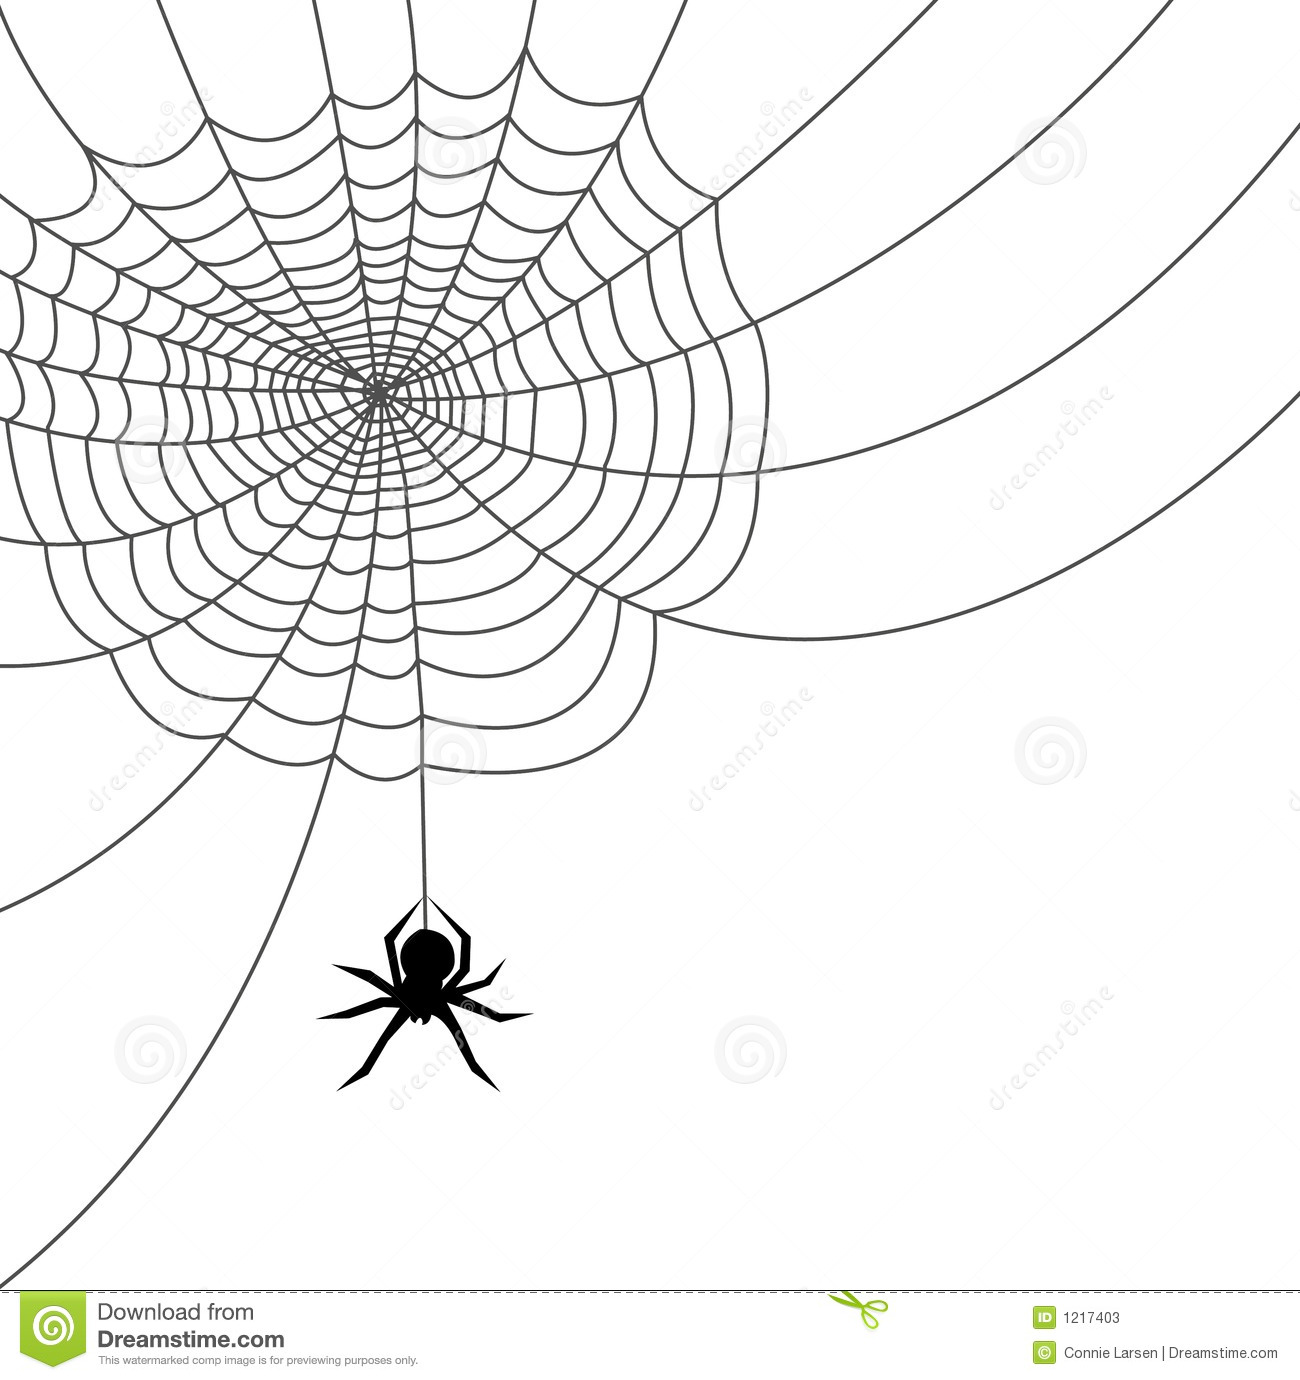 Illustration Of A Spider Web And Spider